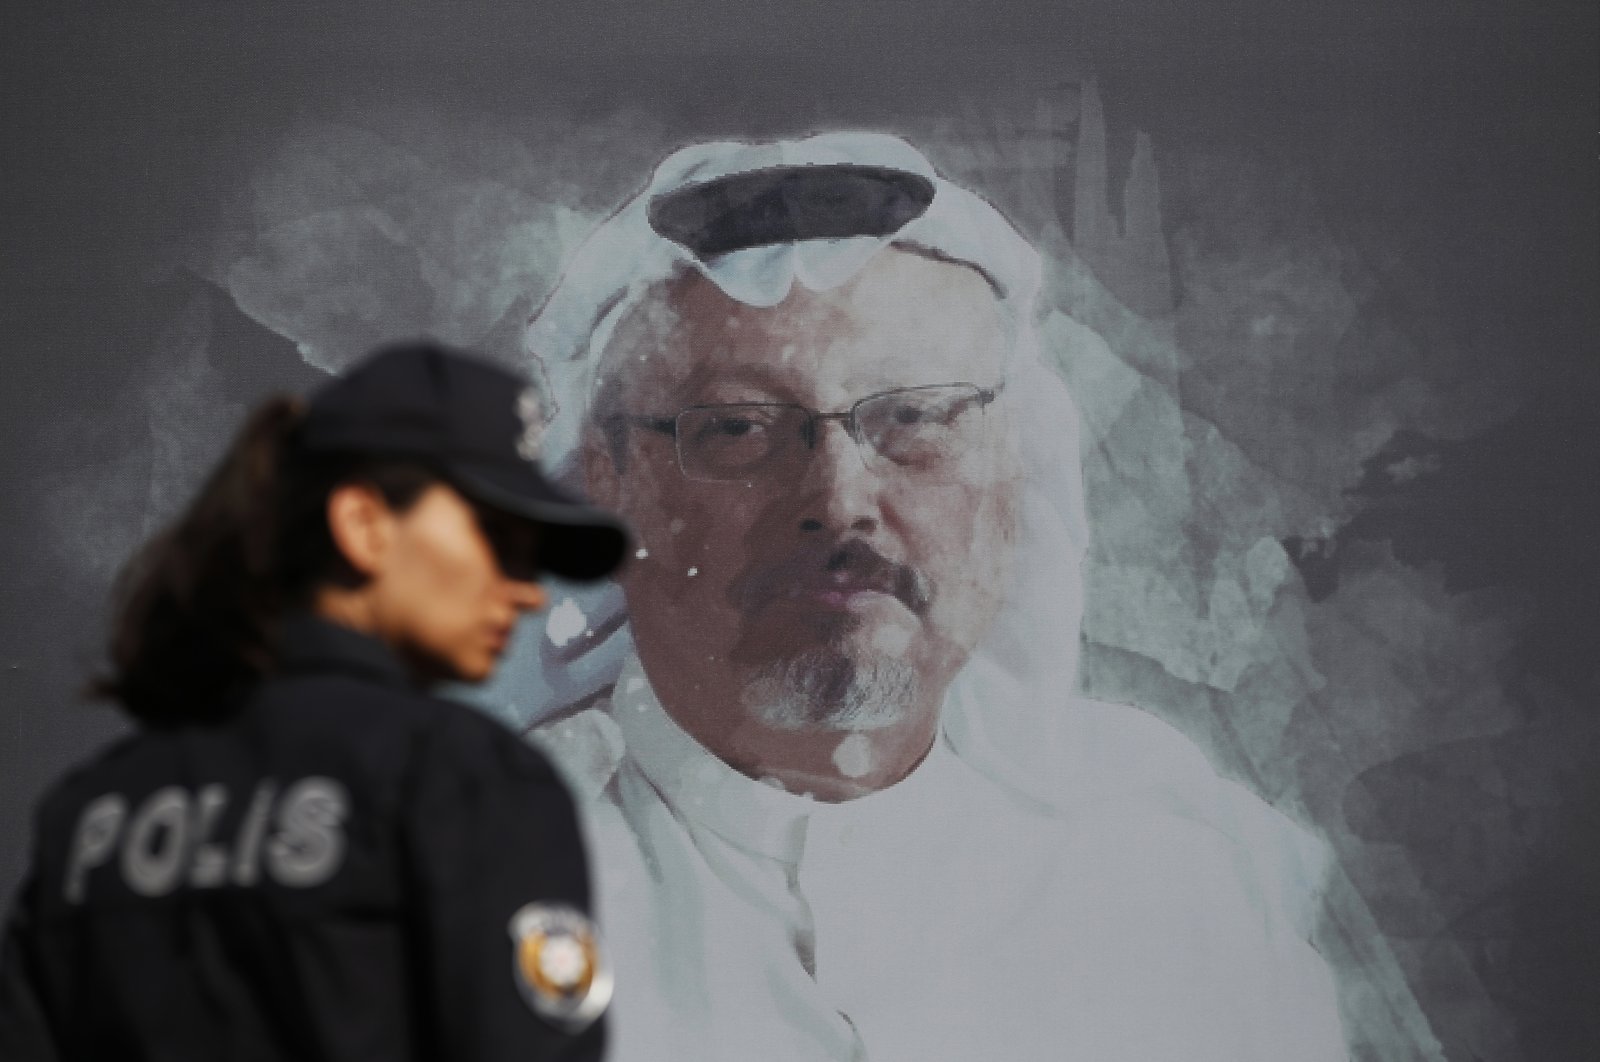 A Turkish police officer walks past a picture of slain Saudi journalist Jamal Khashoggi prior to a ceremony, near the Saudi Arabia consulate in Istanbul, marking the one-year anniversary of his death, Oct. 2, 2019. (AP Photo)